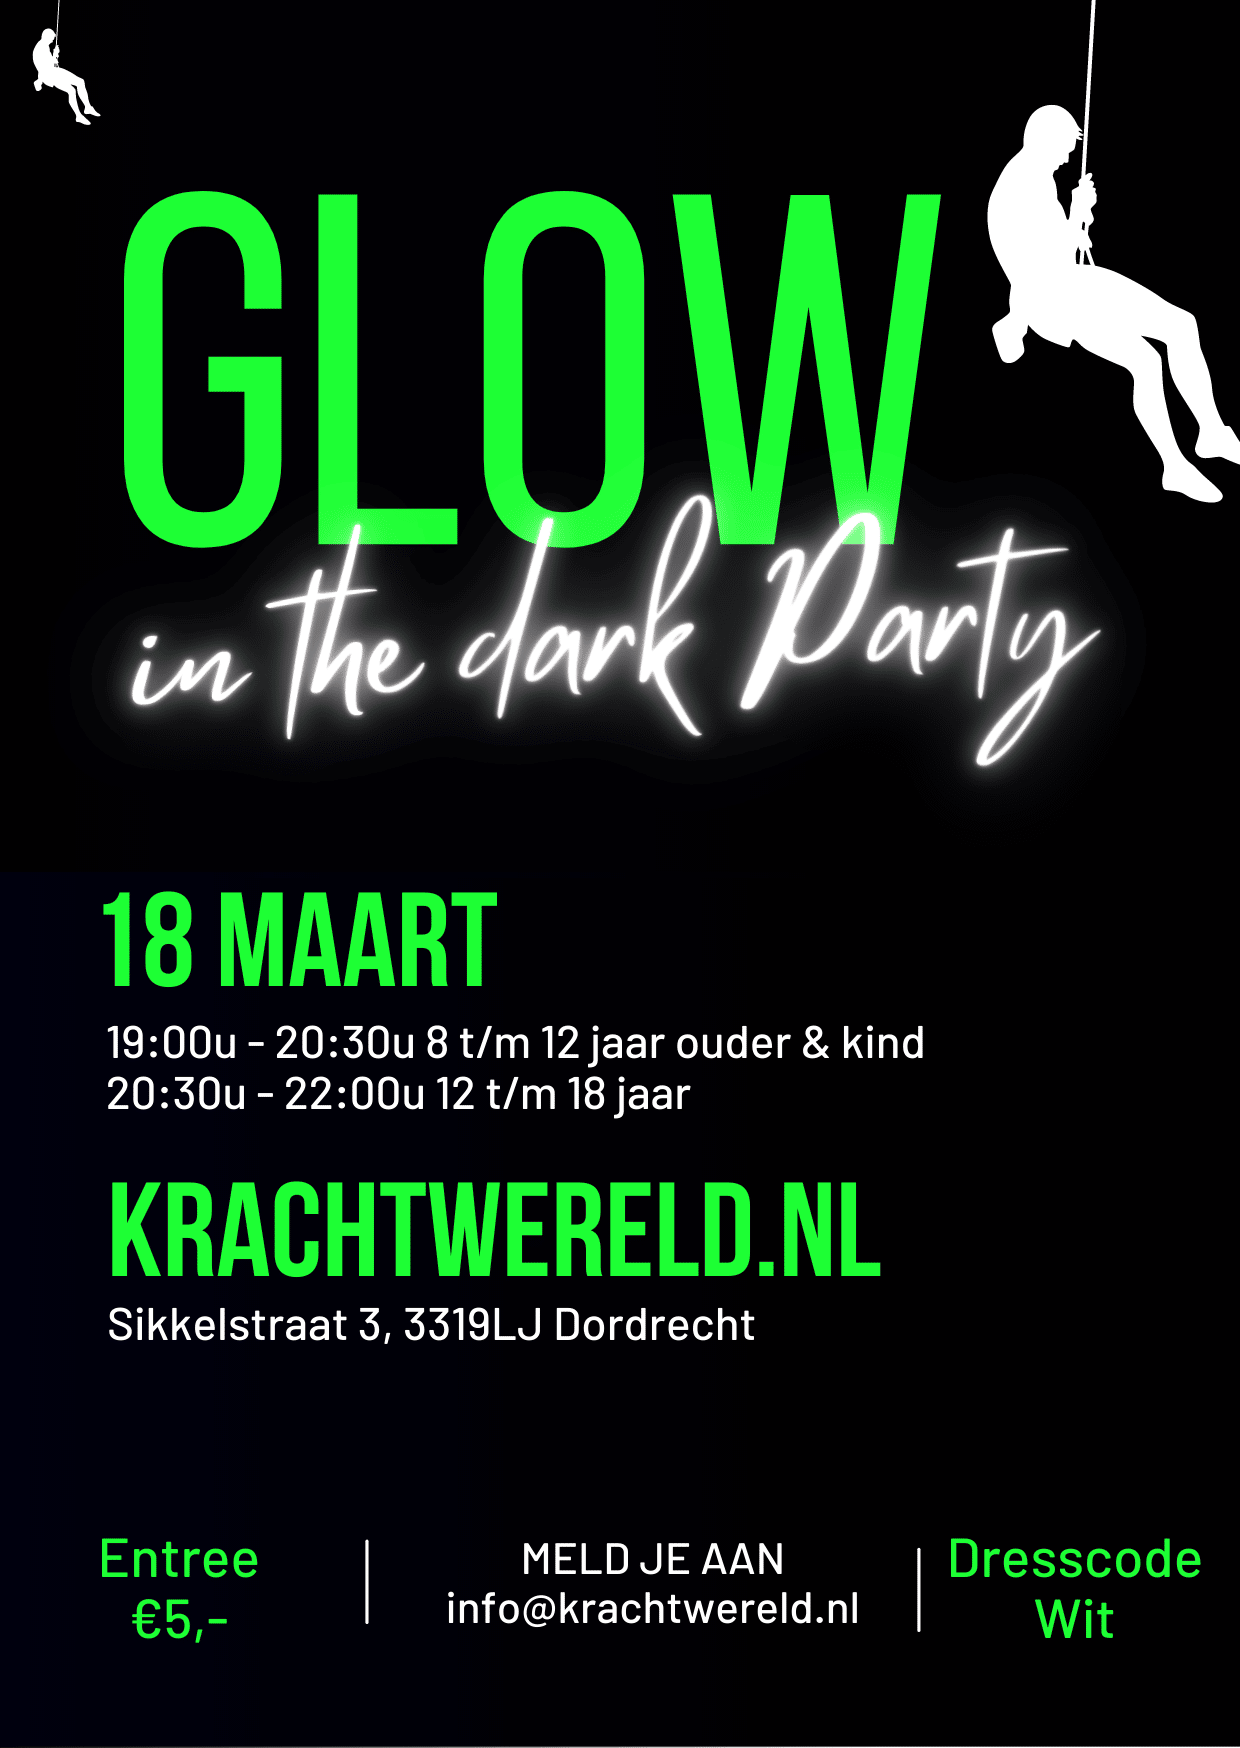 Glow in the Dark party 18 maart a.s.